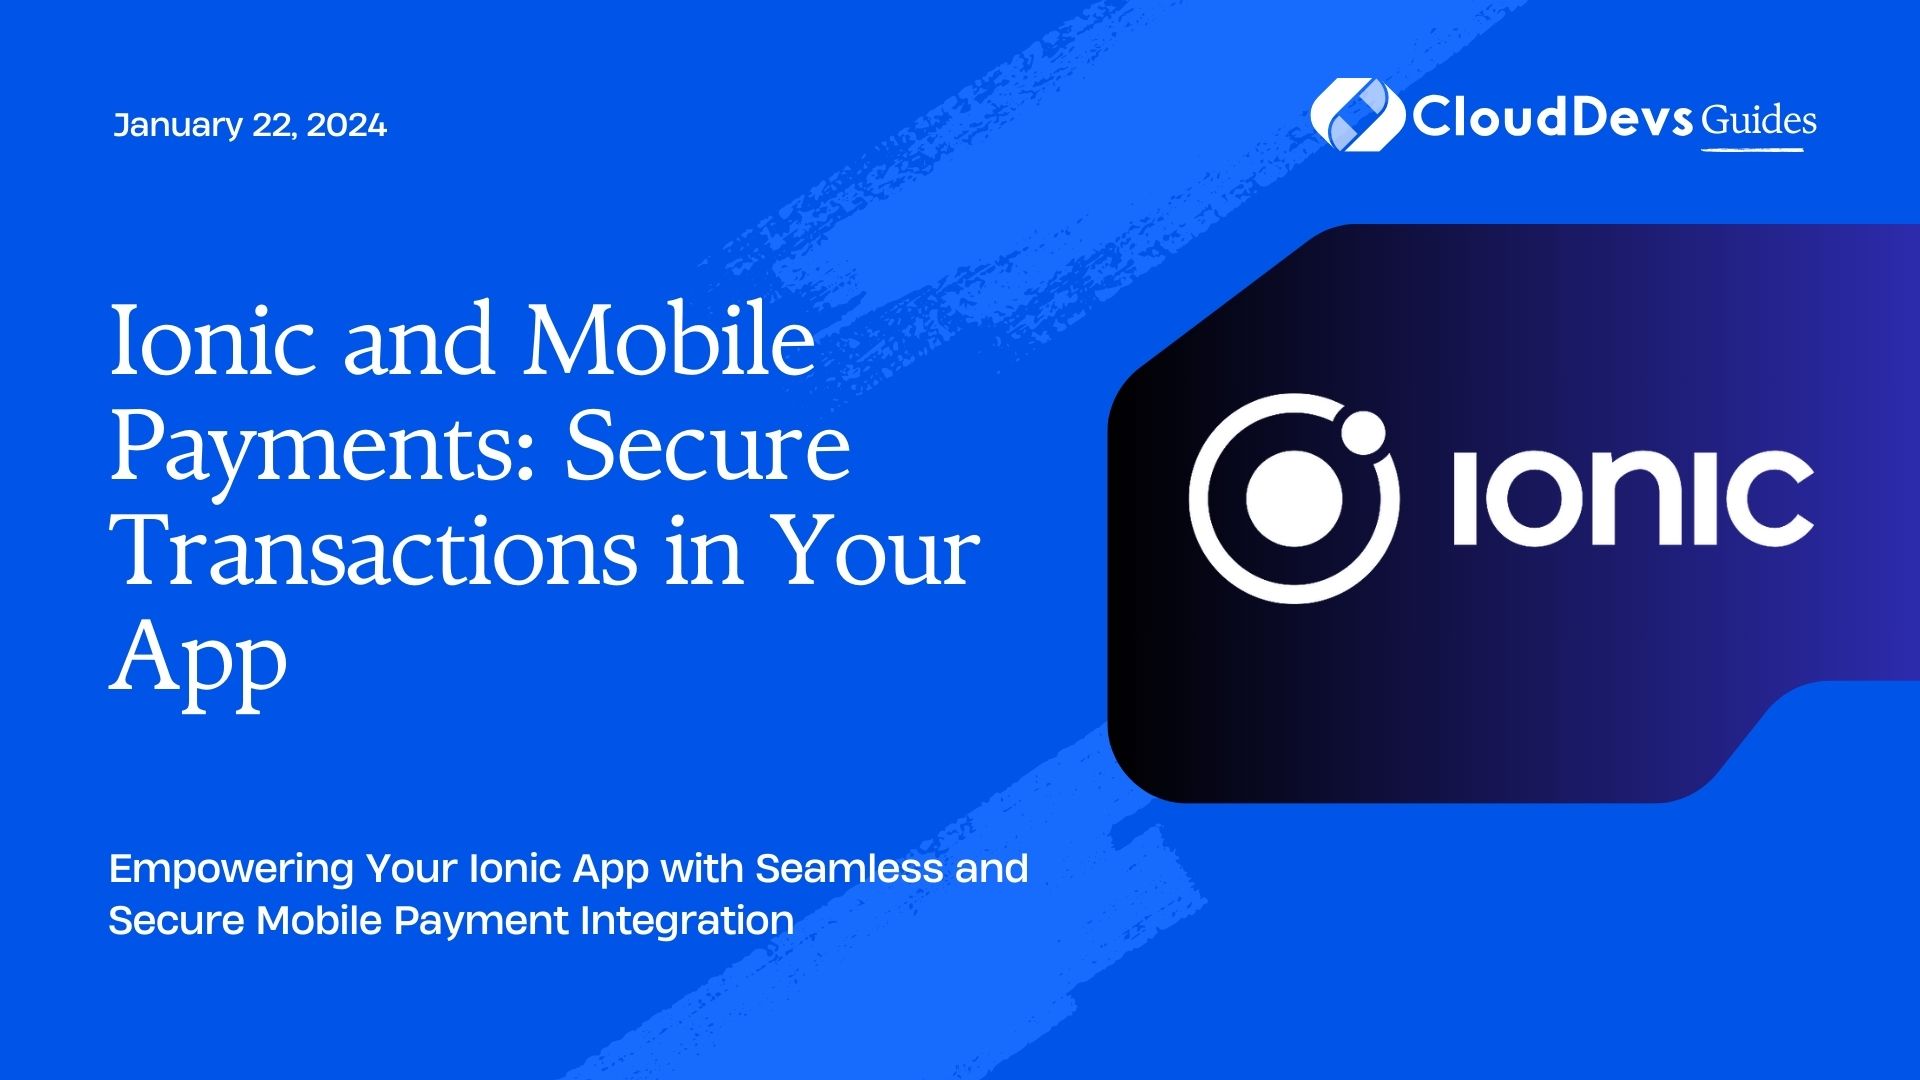 Ionic and Mobile Payments: Secure Transactions in Your App